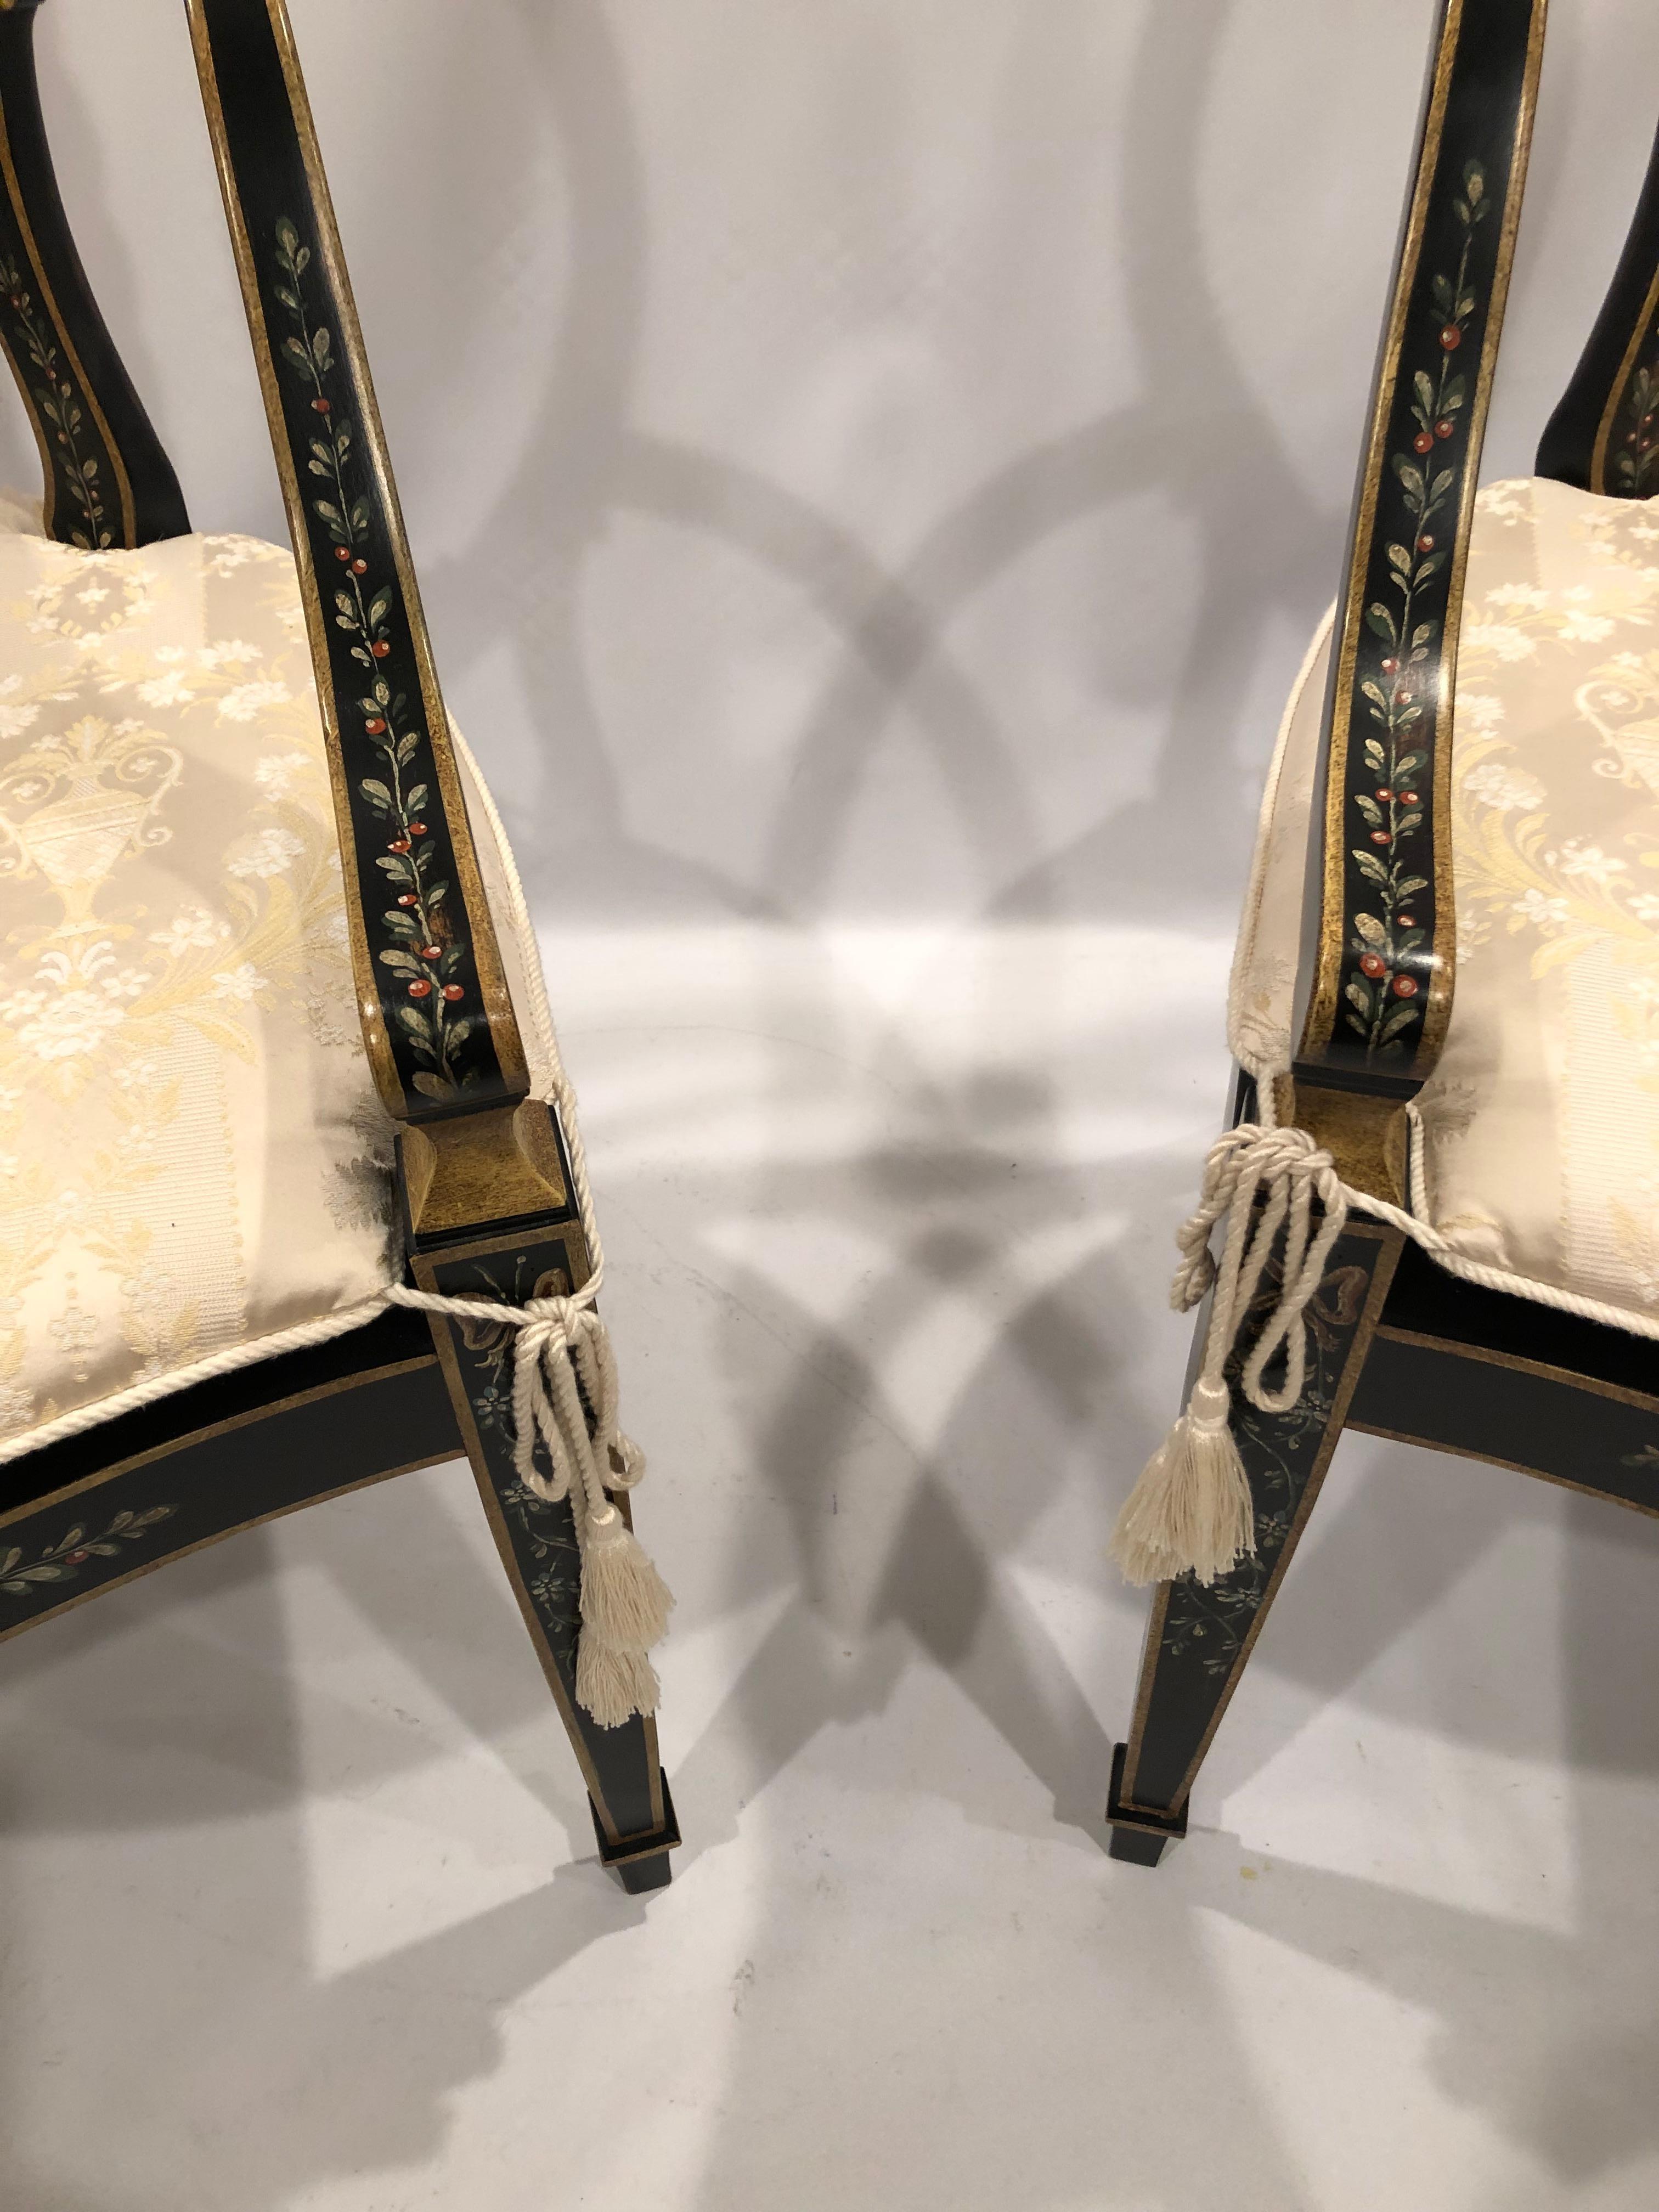 Lovely pair of elegant Adam style hand painted wood armchairs having black background with gold details and red and green berry like decoration. Seats are caned with custom off white cushions.
Measures: Arm height 28.5.